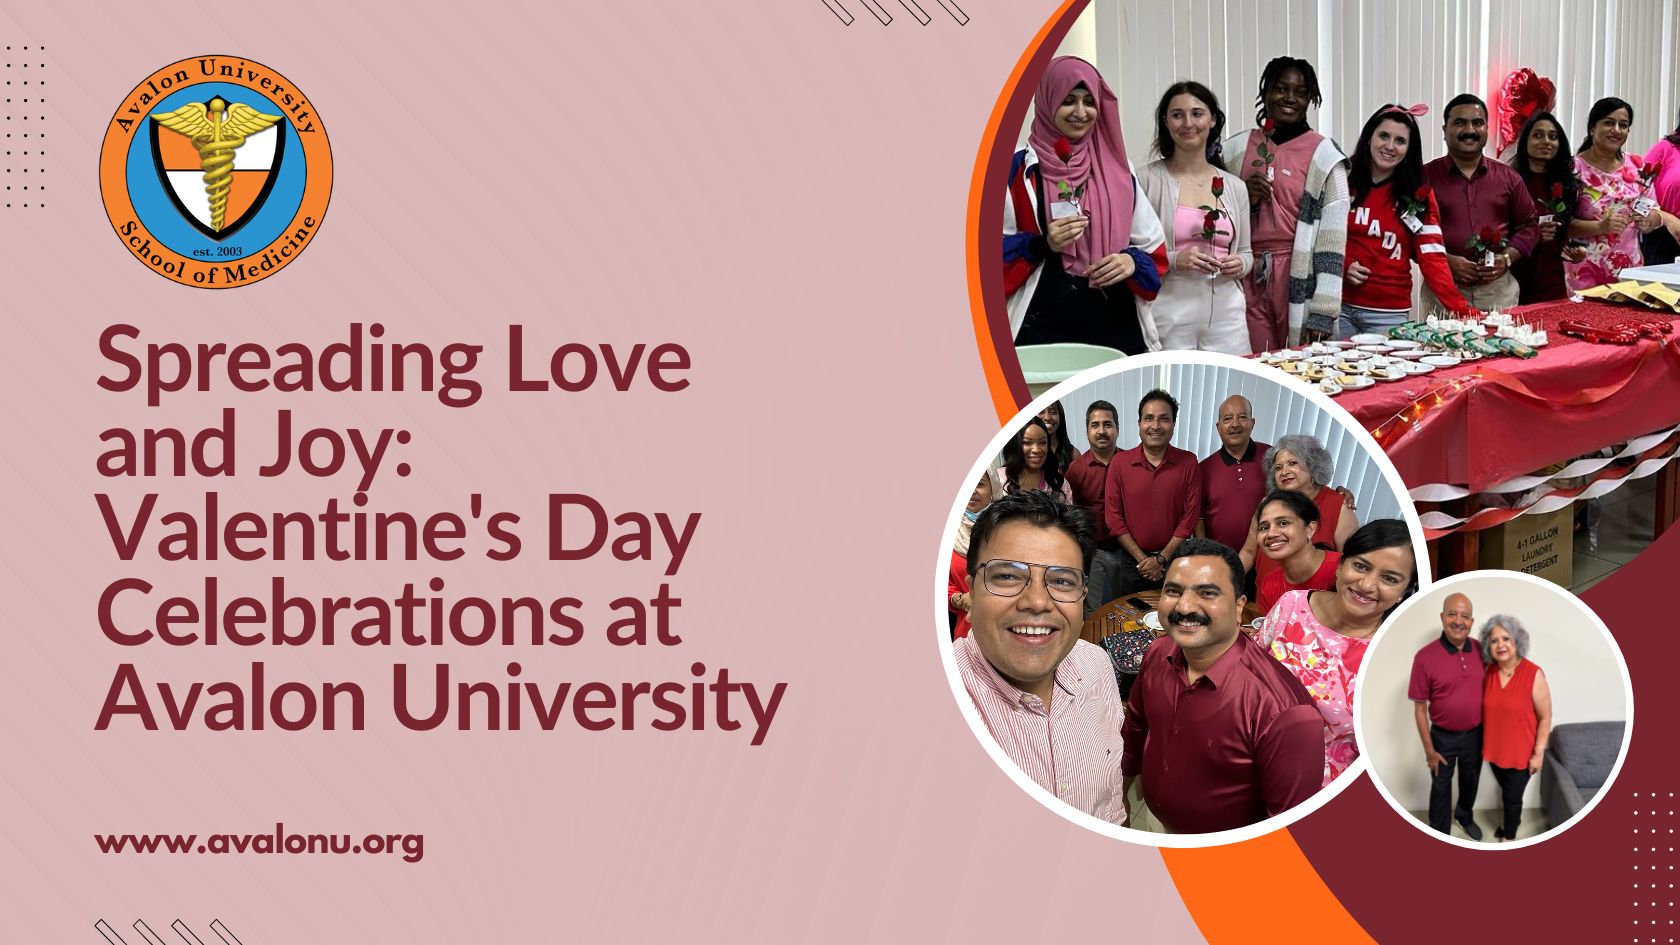 Student Government Association - Valentine's day